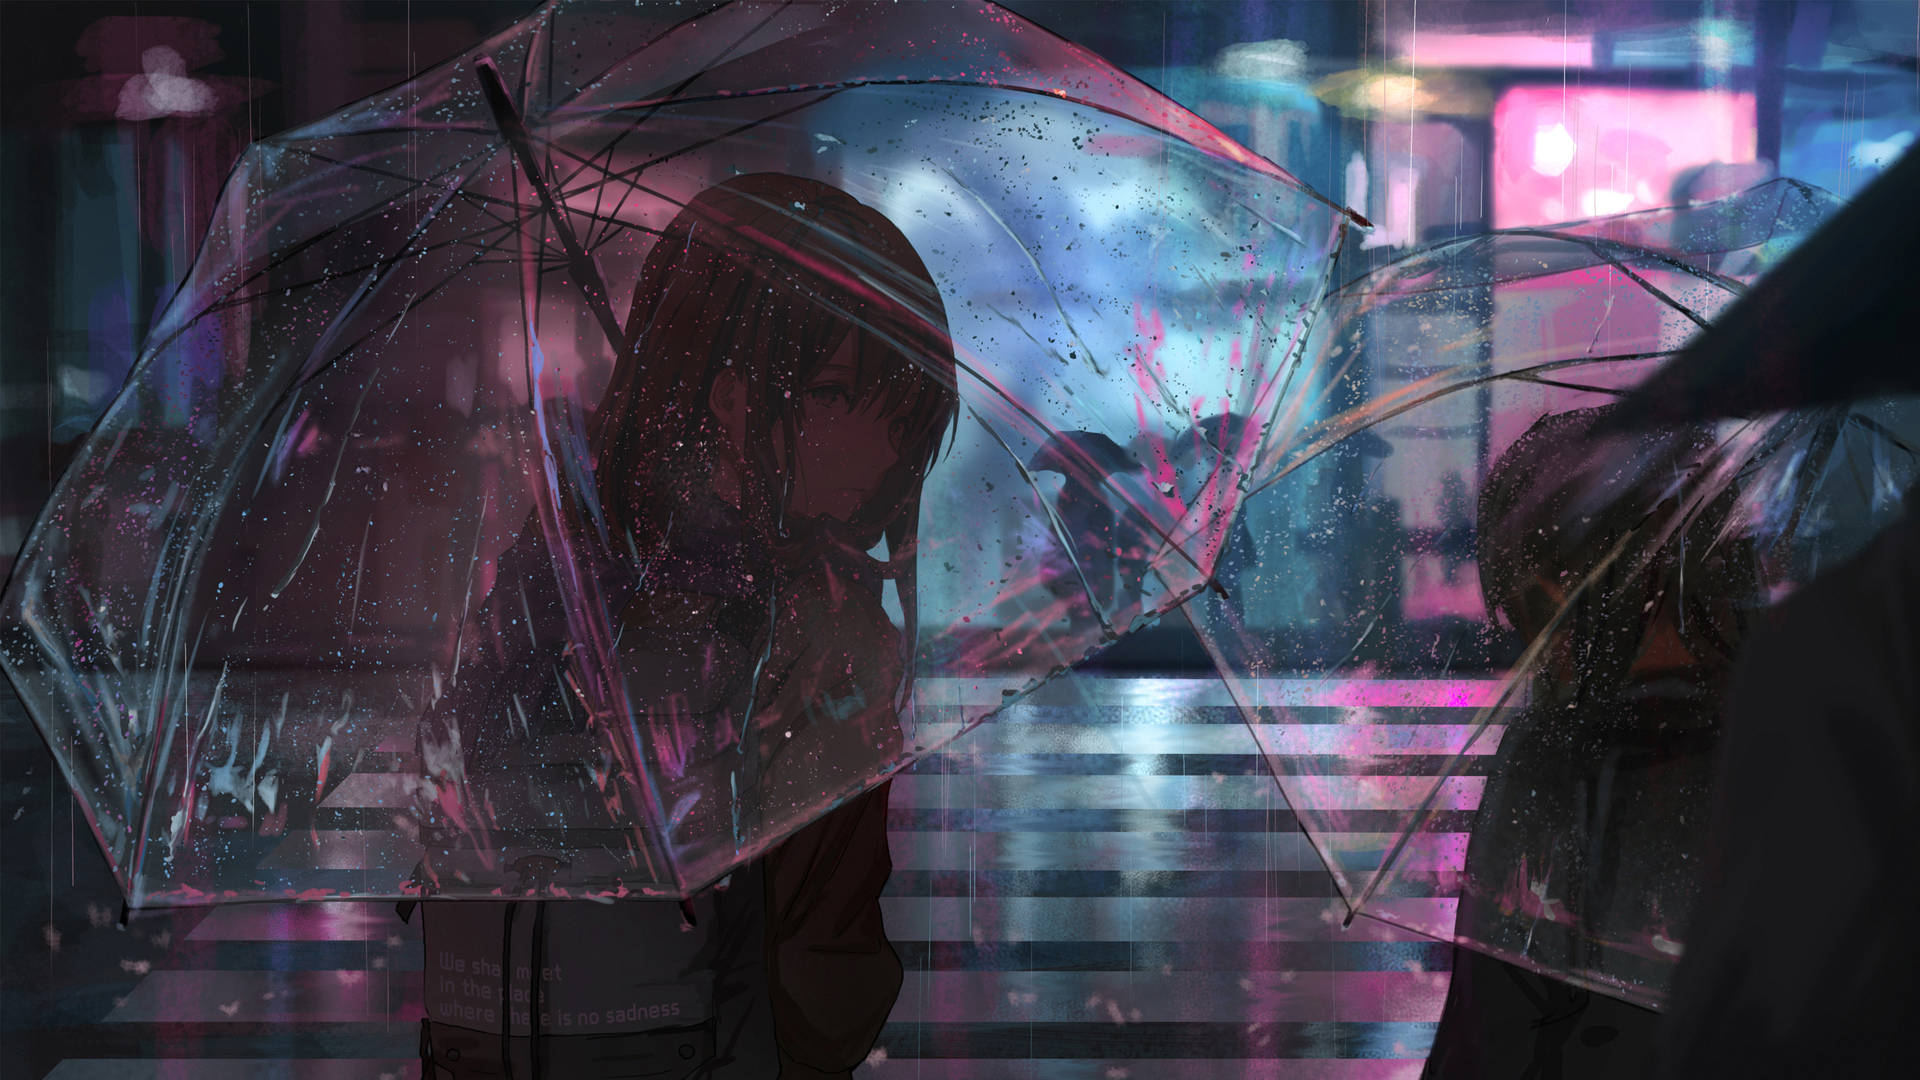 two people holding umbrellas in the rain Wallpaper